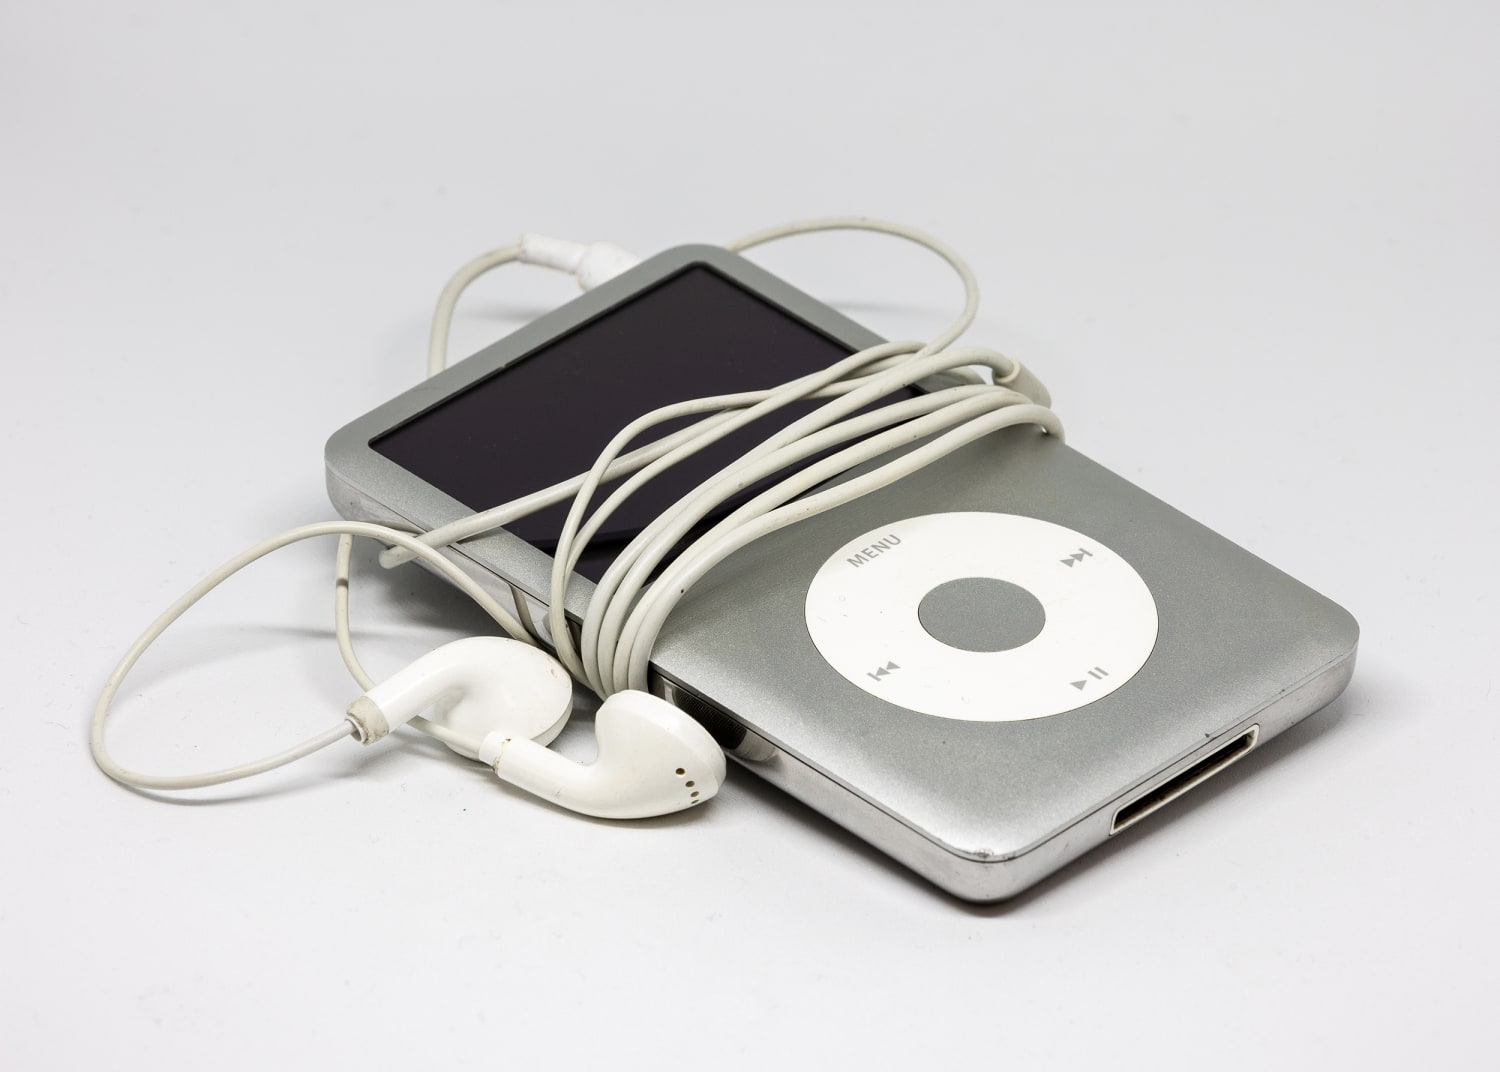 Say Goodbye to the iPod Classic